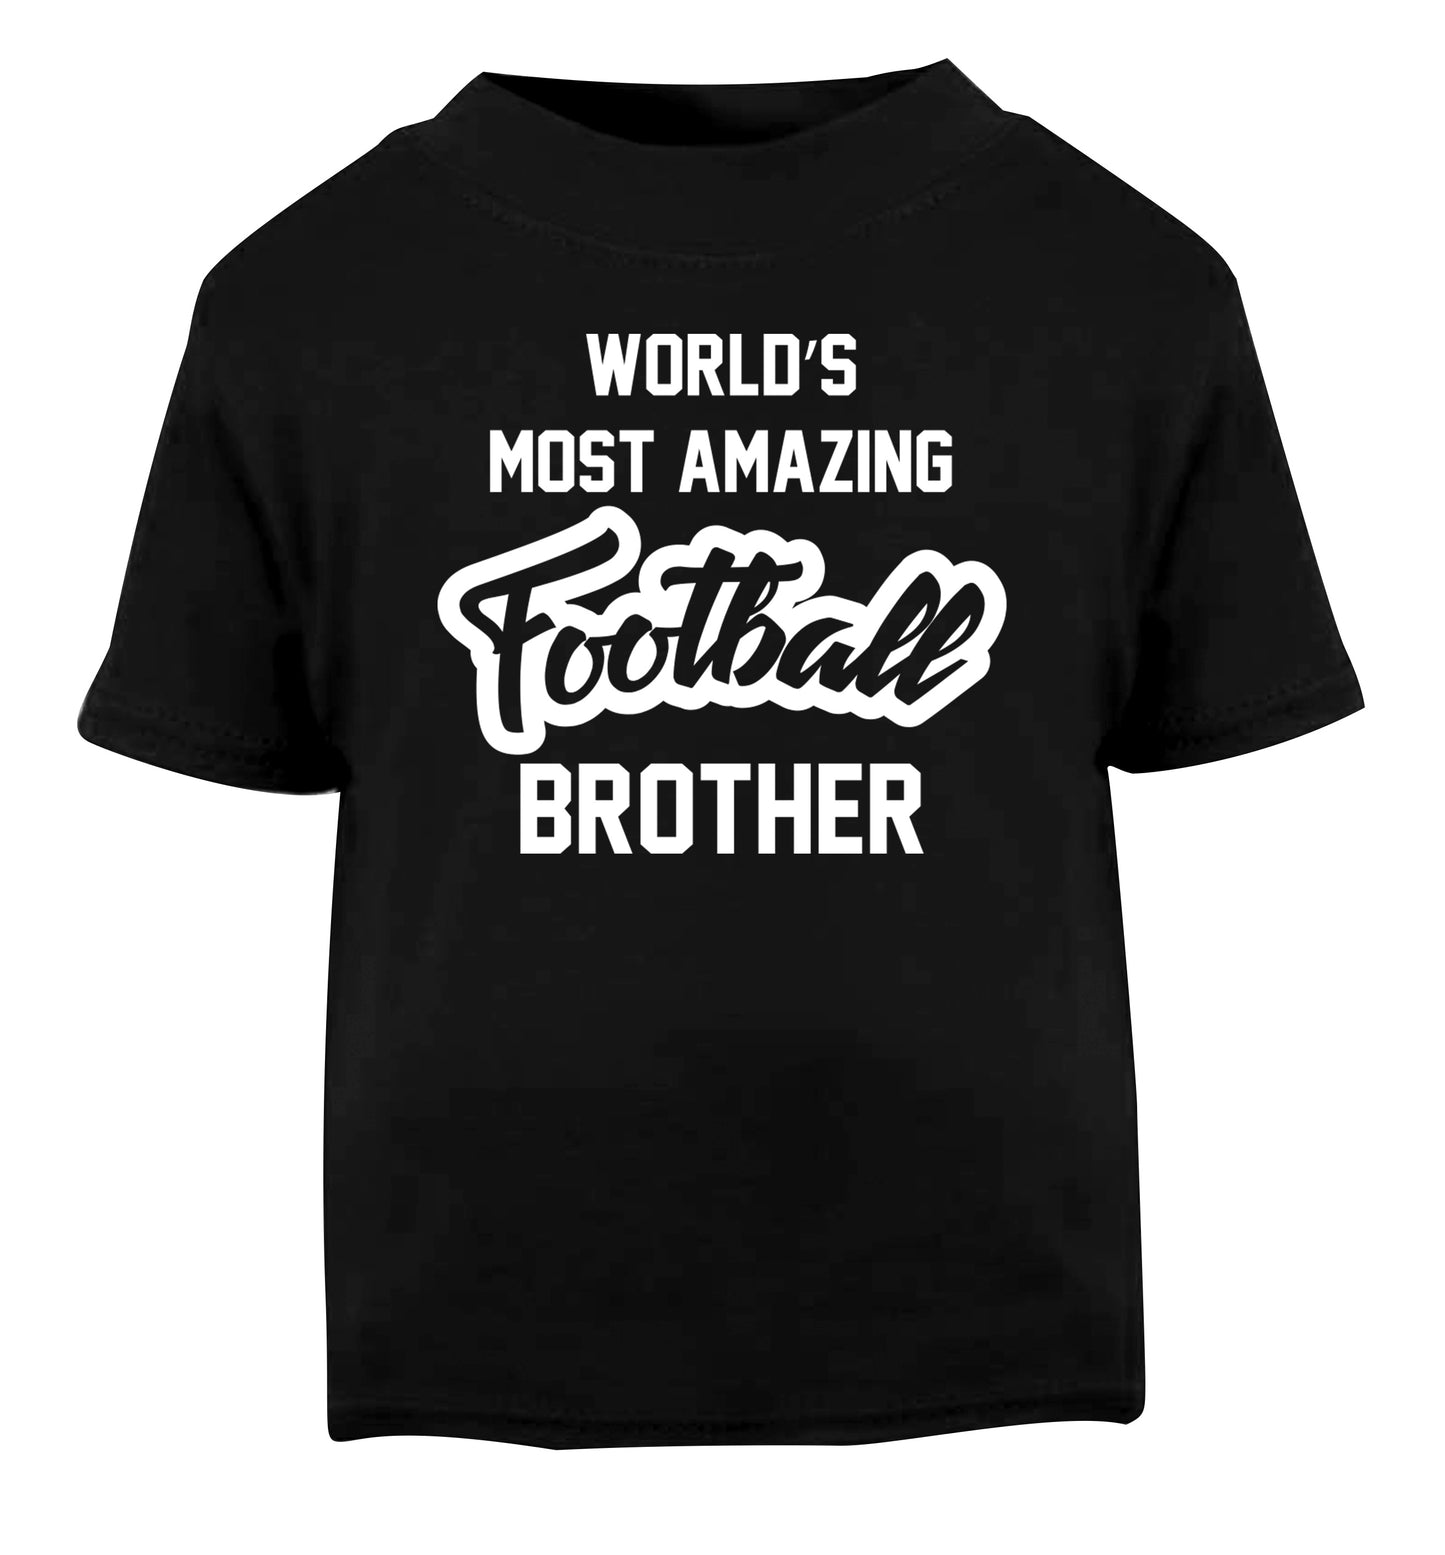 Worlds most amazing football brother Black Baby Toddler Tshirt 2 years